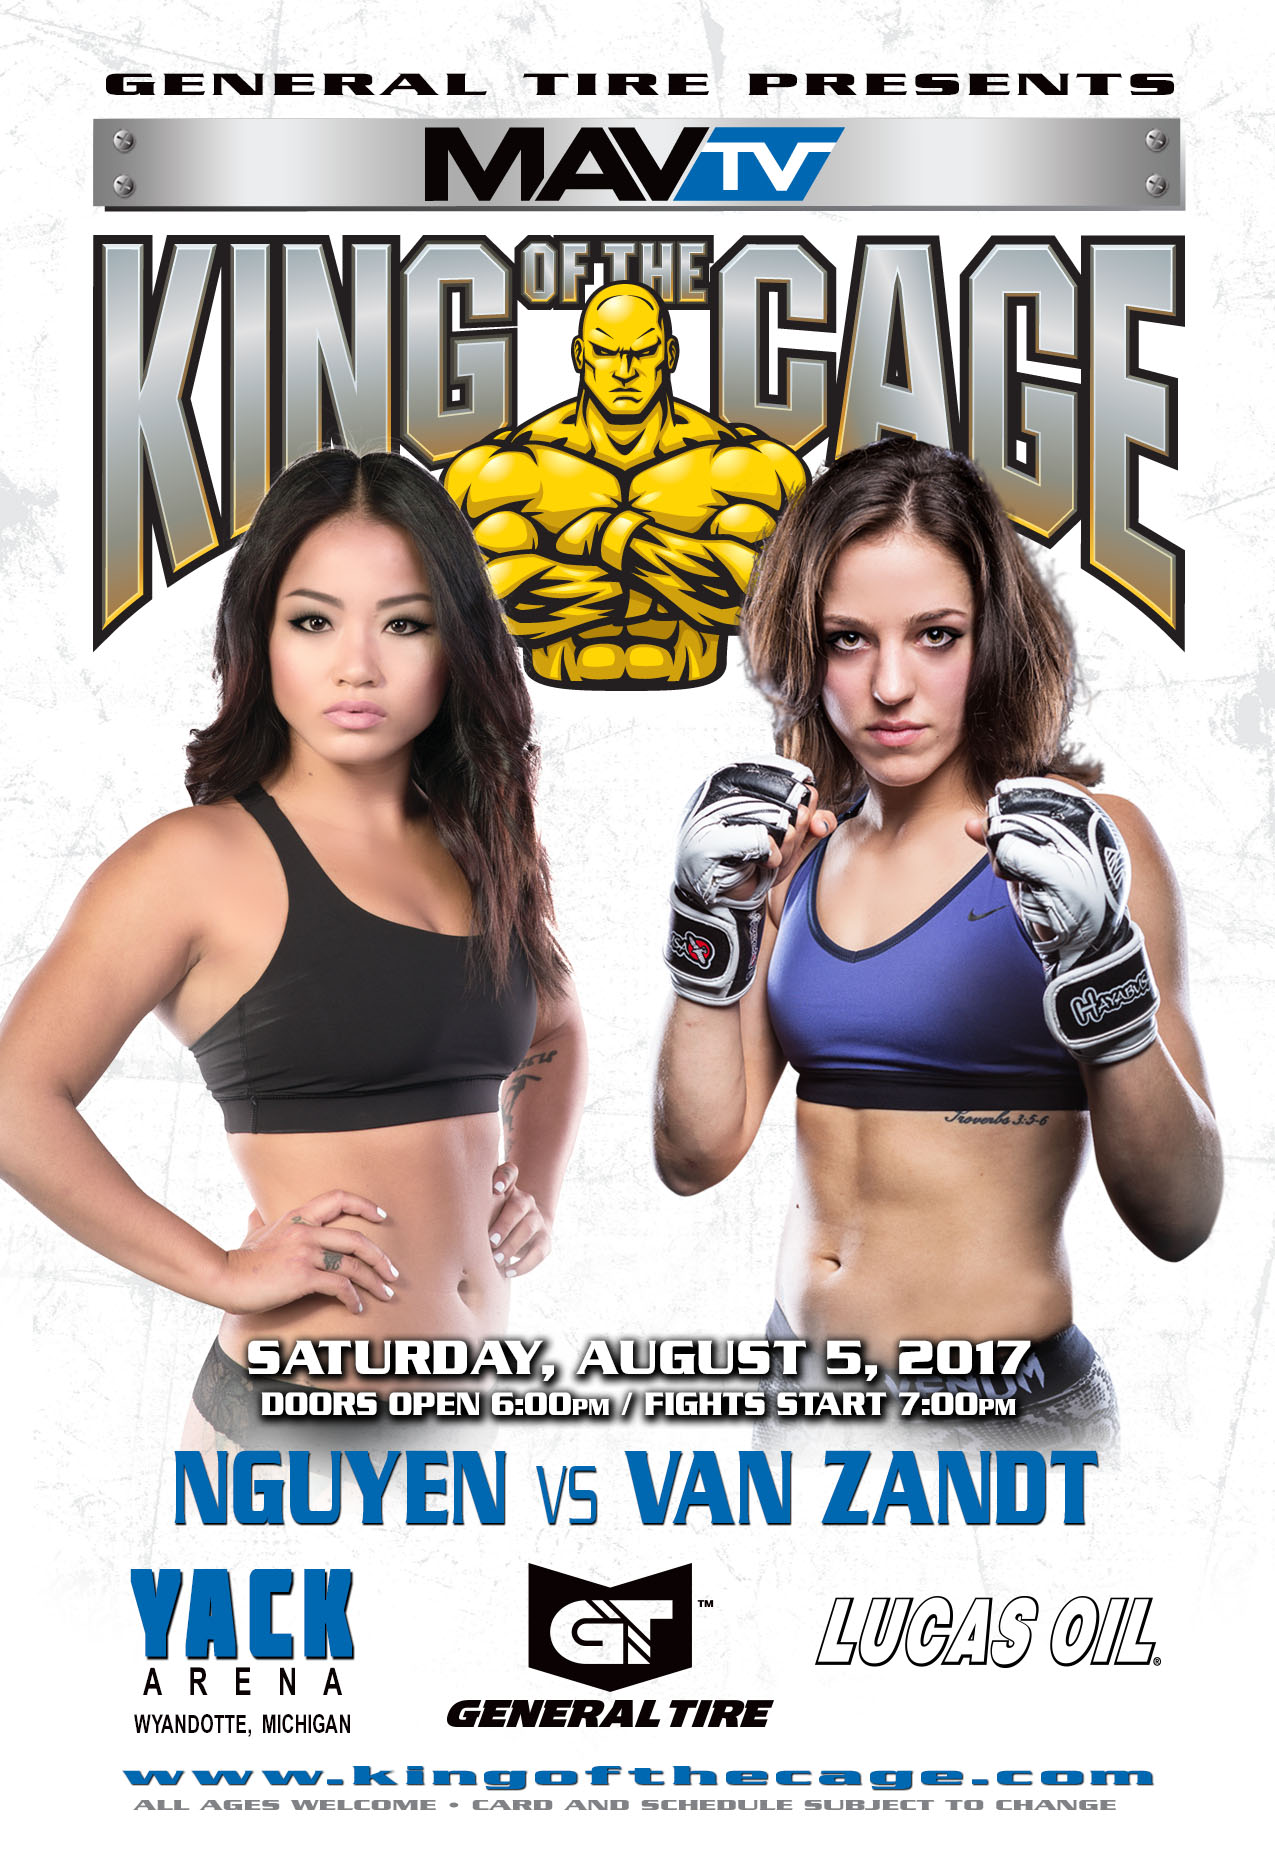 Nguyen/VanZandt Bout to be Streamed Live on August 5 at Yack Arena